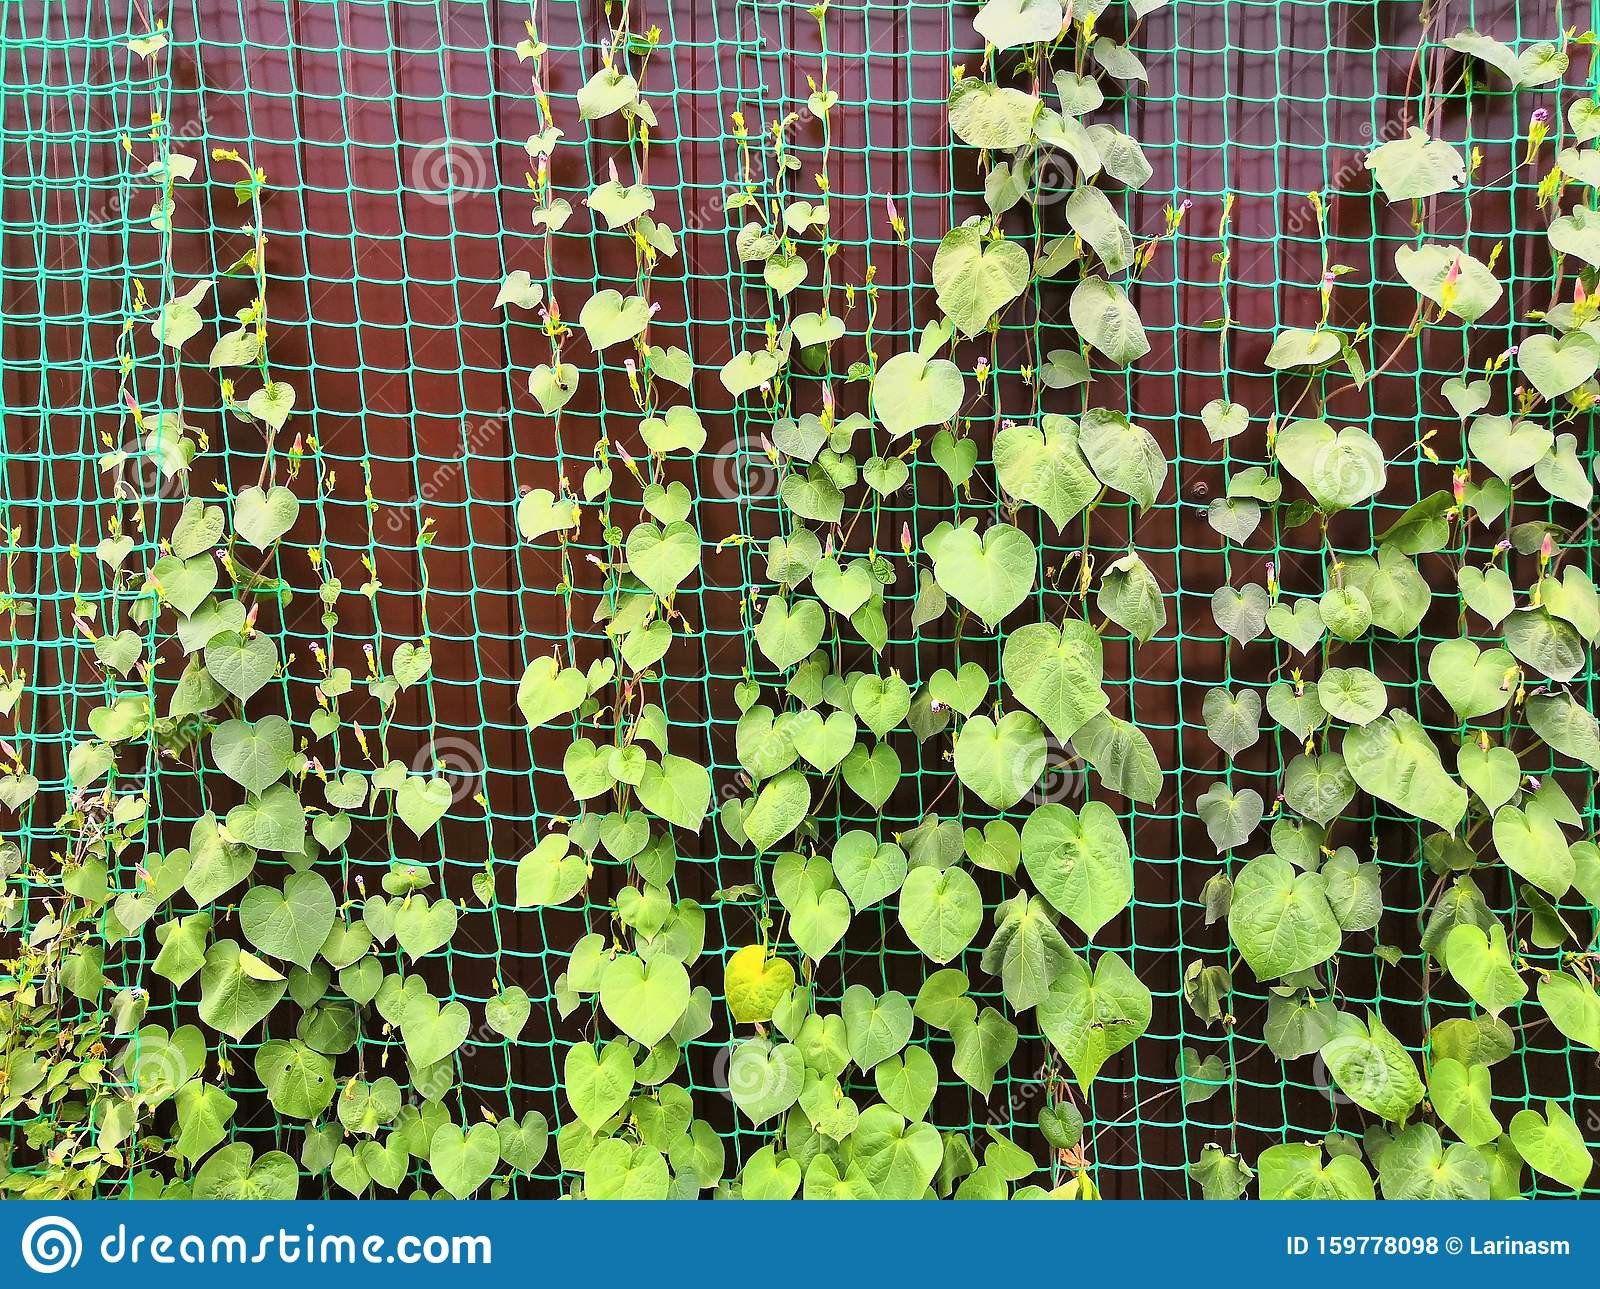 Green Climbing Plants With Leaves On Grid And Fence Background